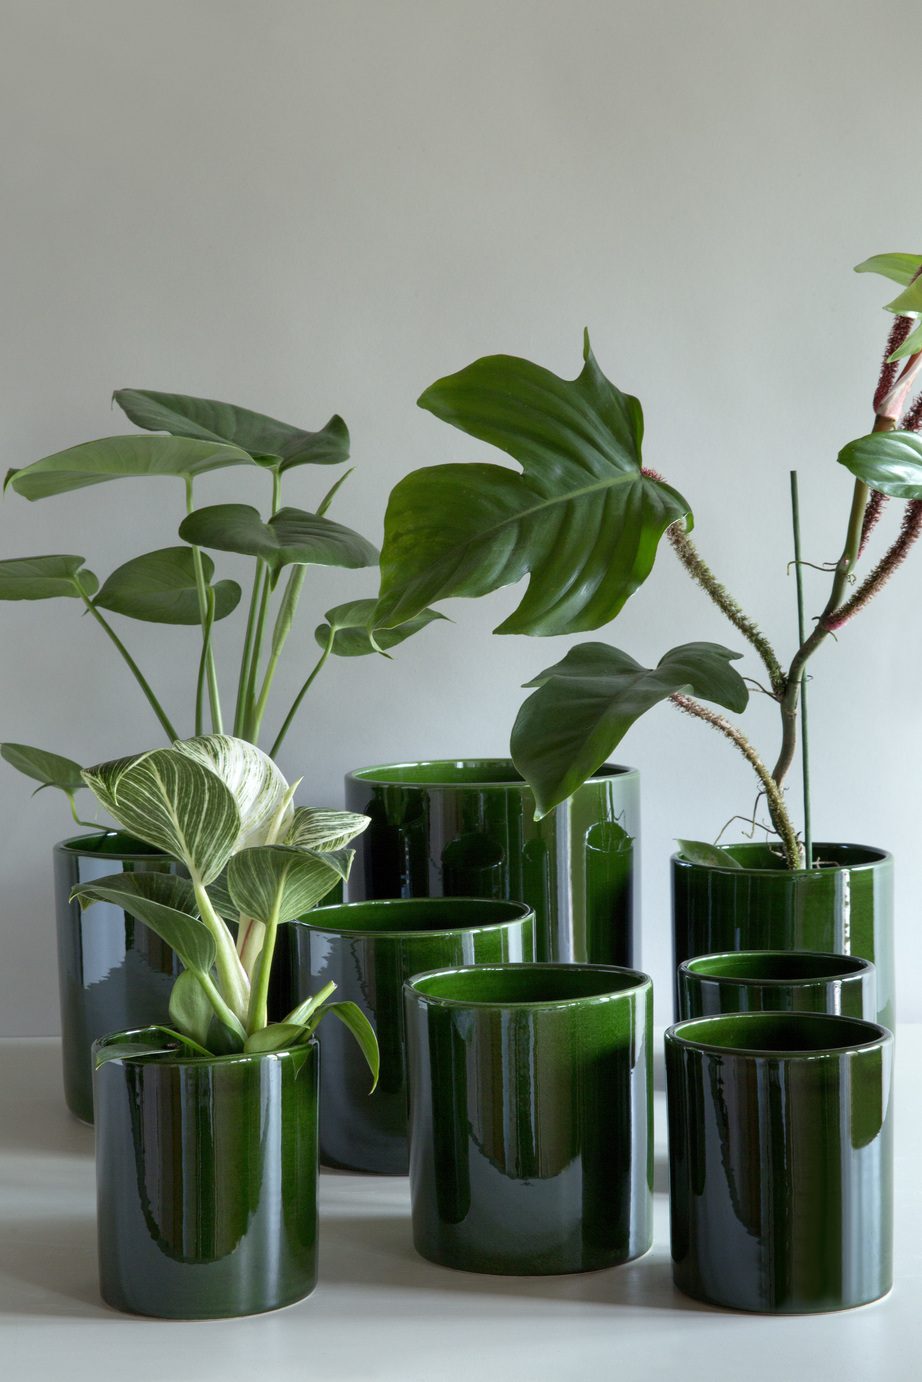 Collection of green glazed cylindrical flowerpots and vases with green plants